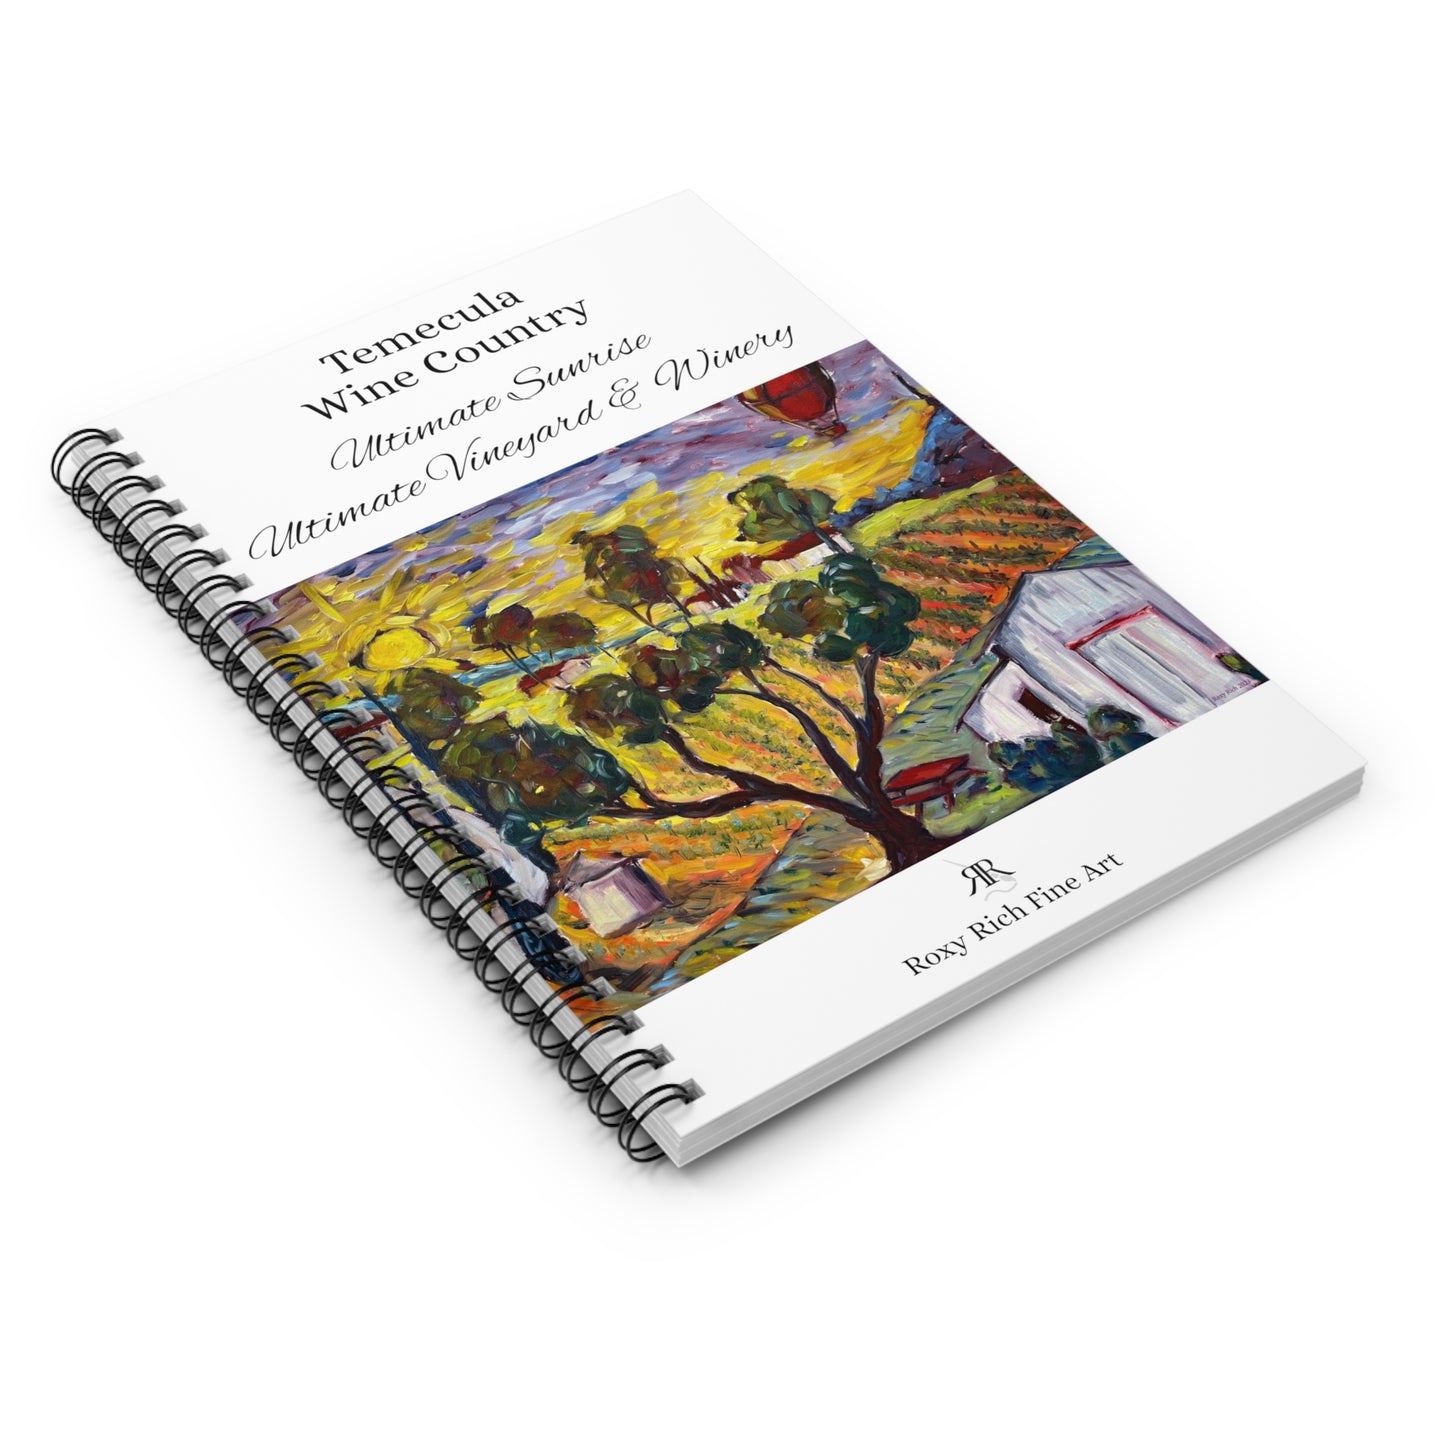 Temecula Wine Country "Ultimate Sunrise" Spiral Notebook